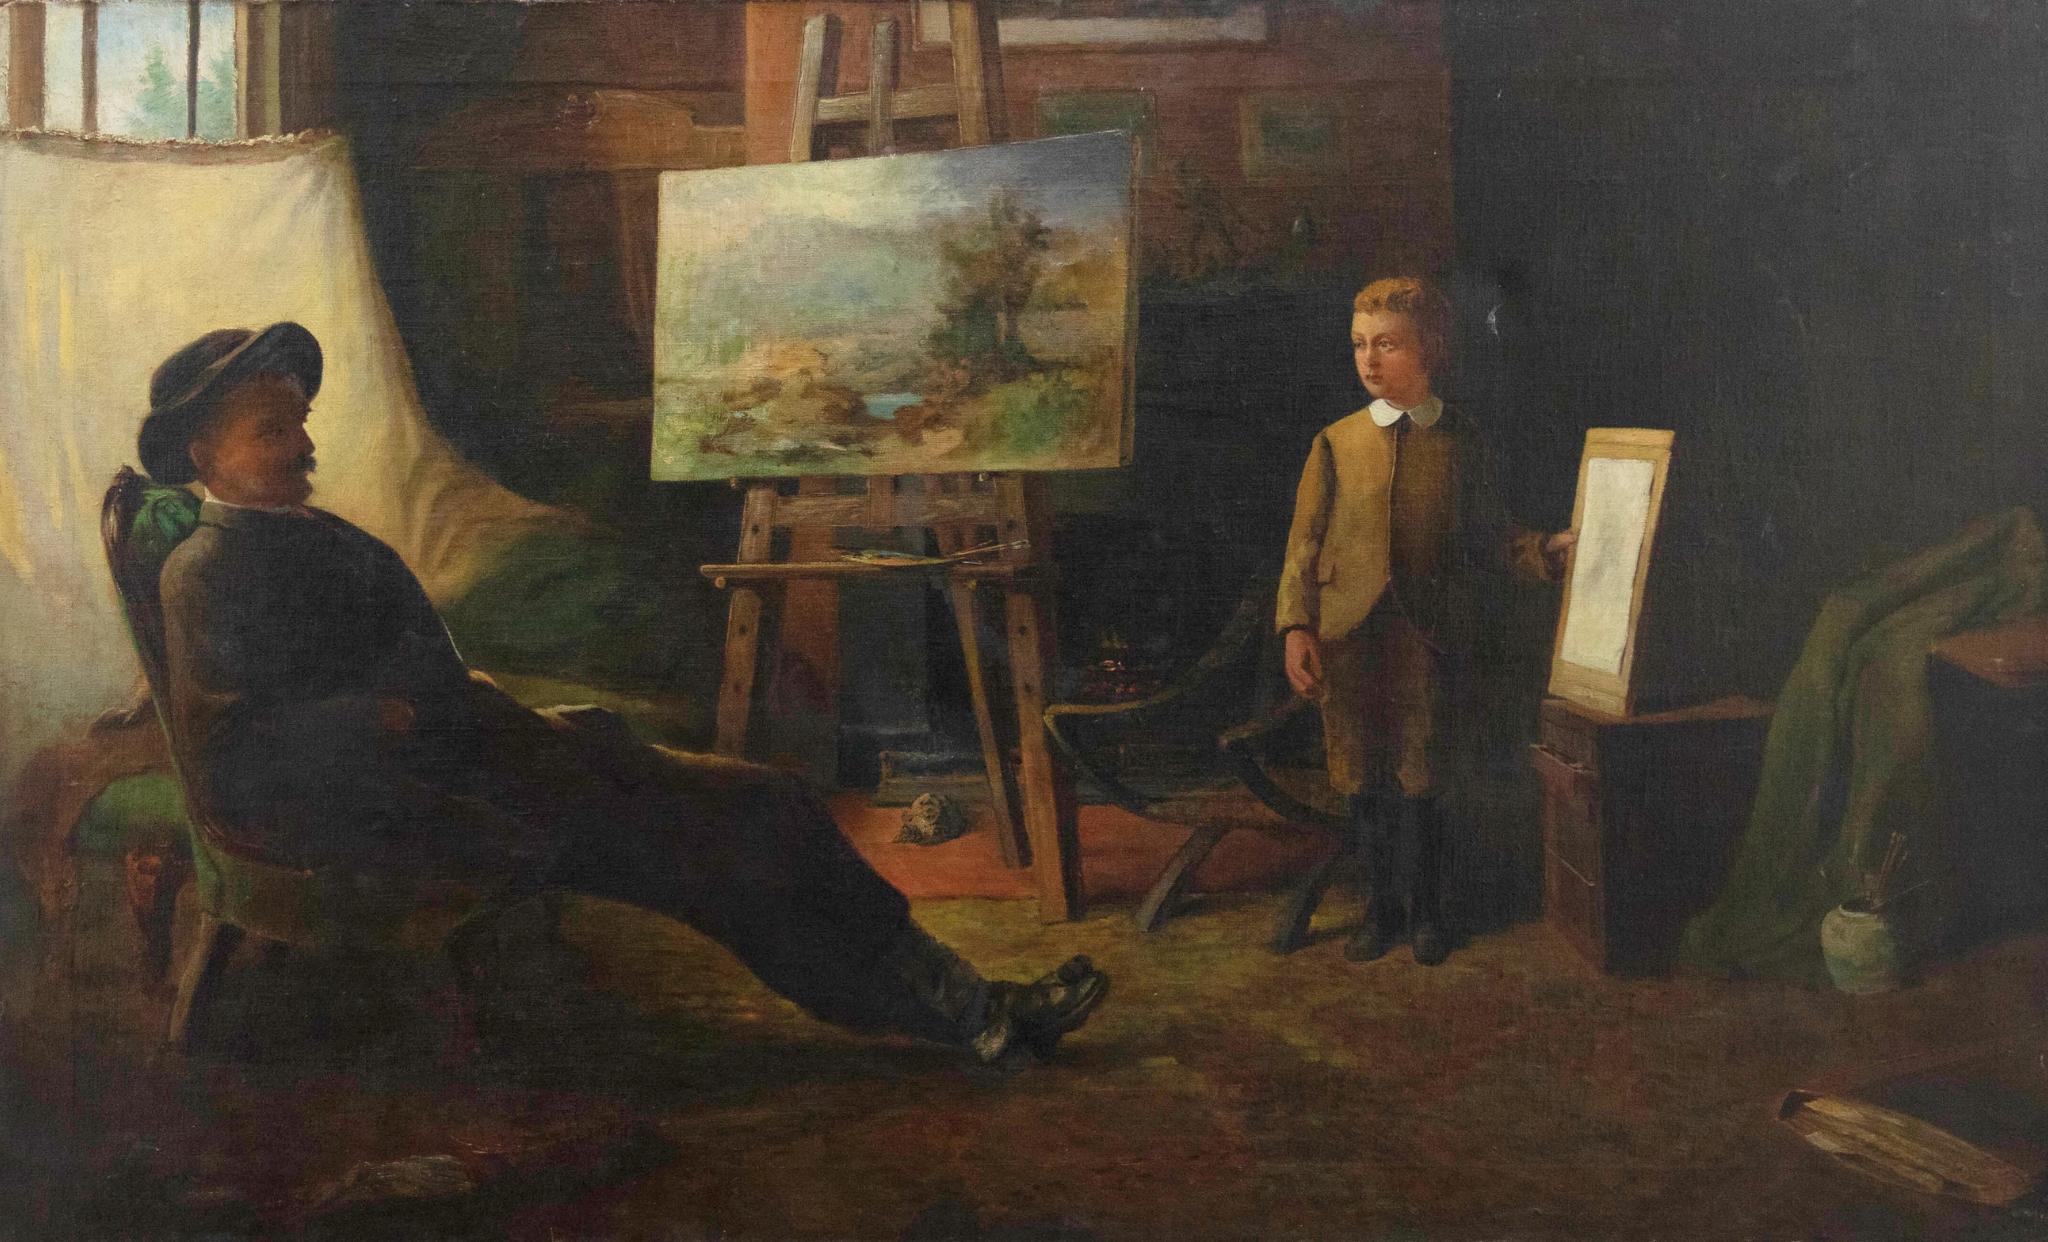 Unknown Figurative Painting - Late 19th Century Oil - The Artist and his Apprentice